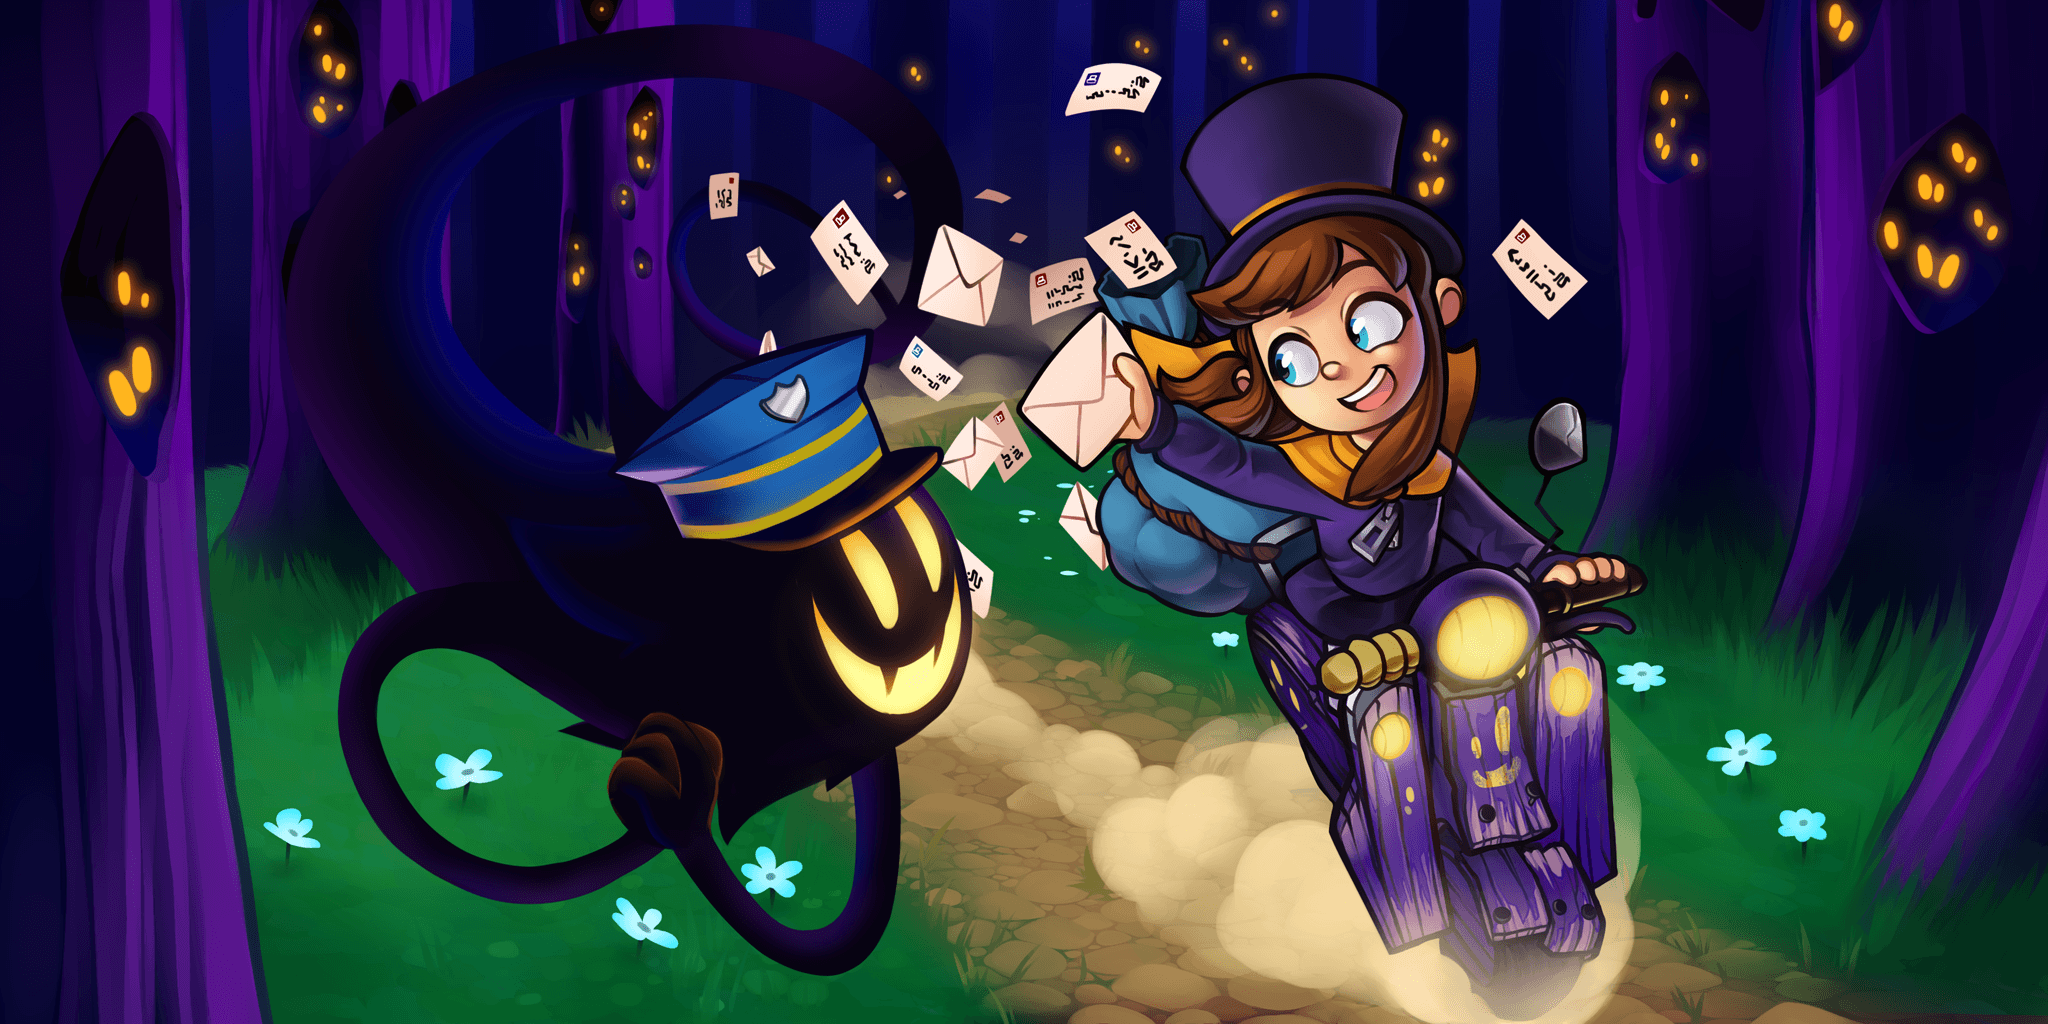 Missions. A Hat in Time